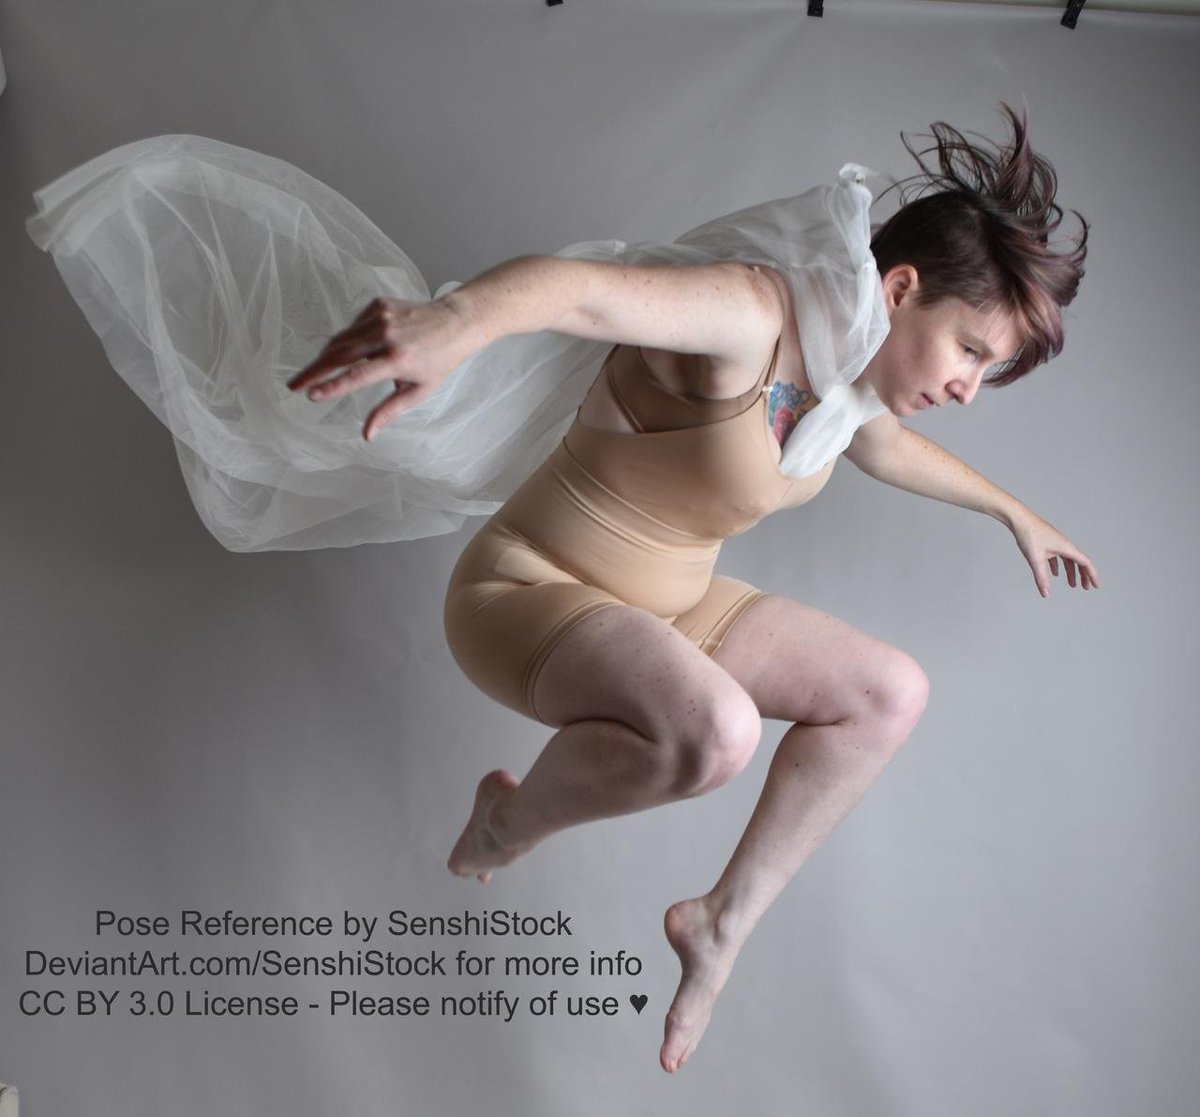 Best 5 Human Poses References Packs for Artists. | by Tutorials & Packs for  Artists | Medium